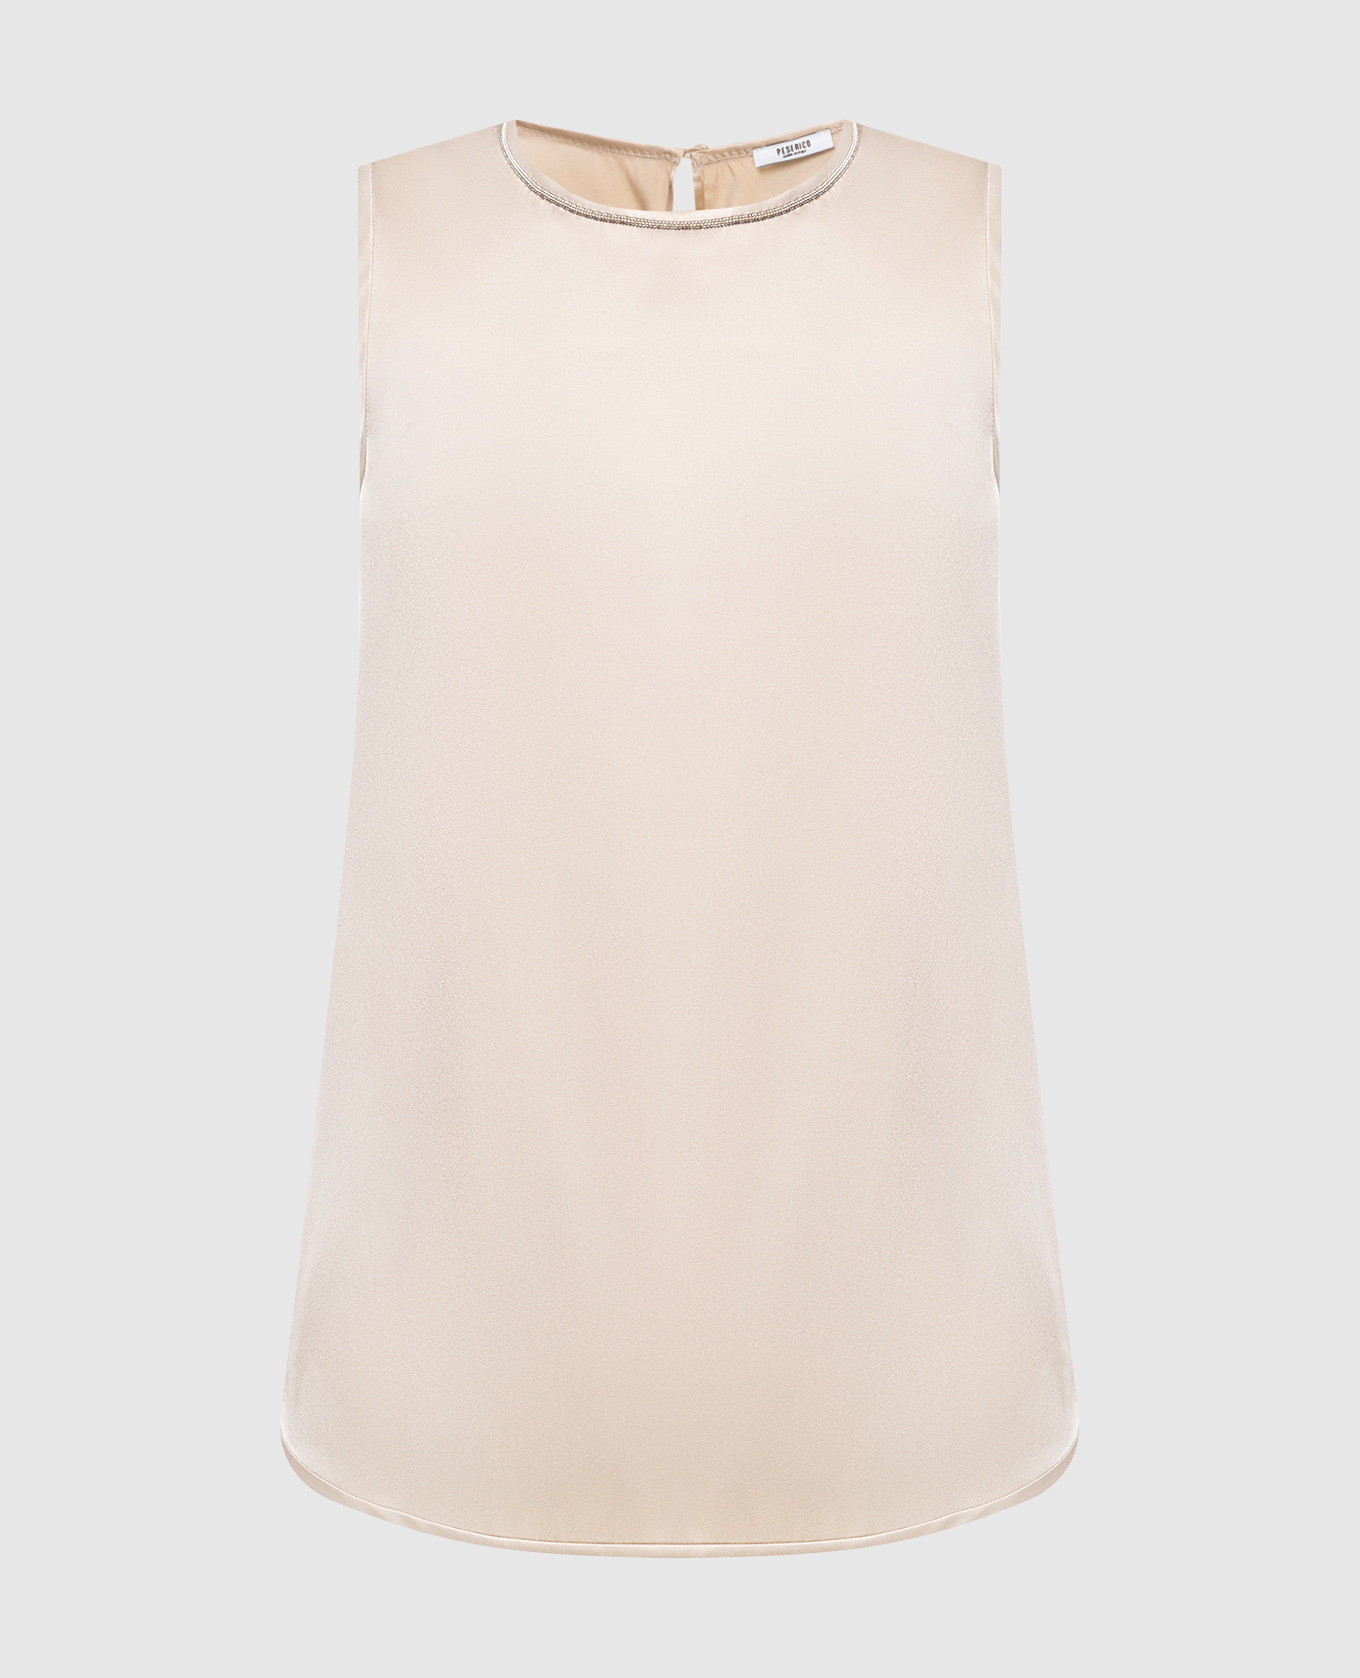 Light beige silk top with chains